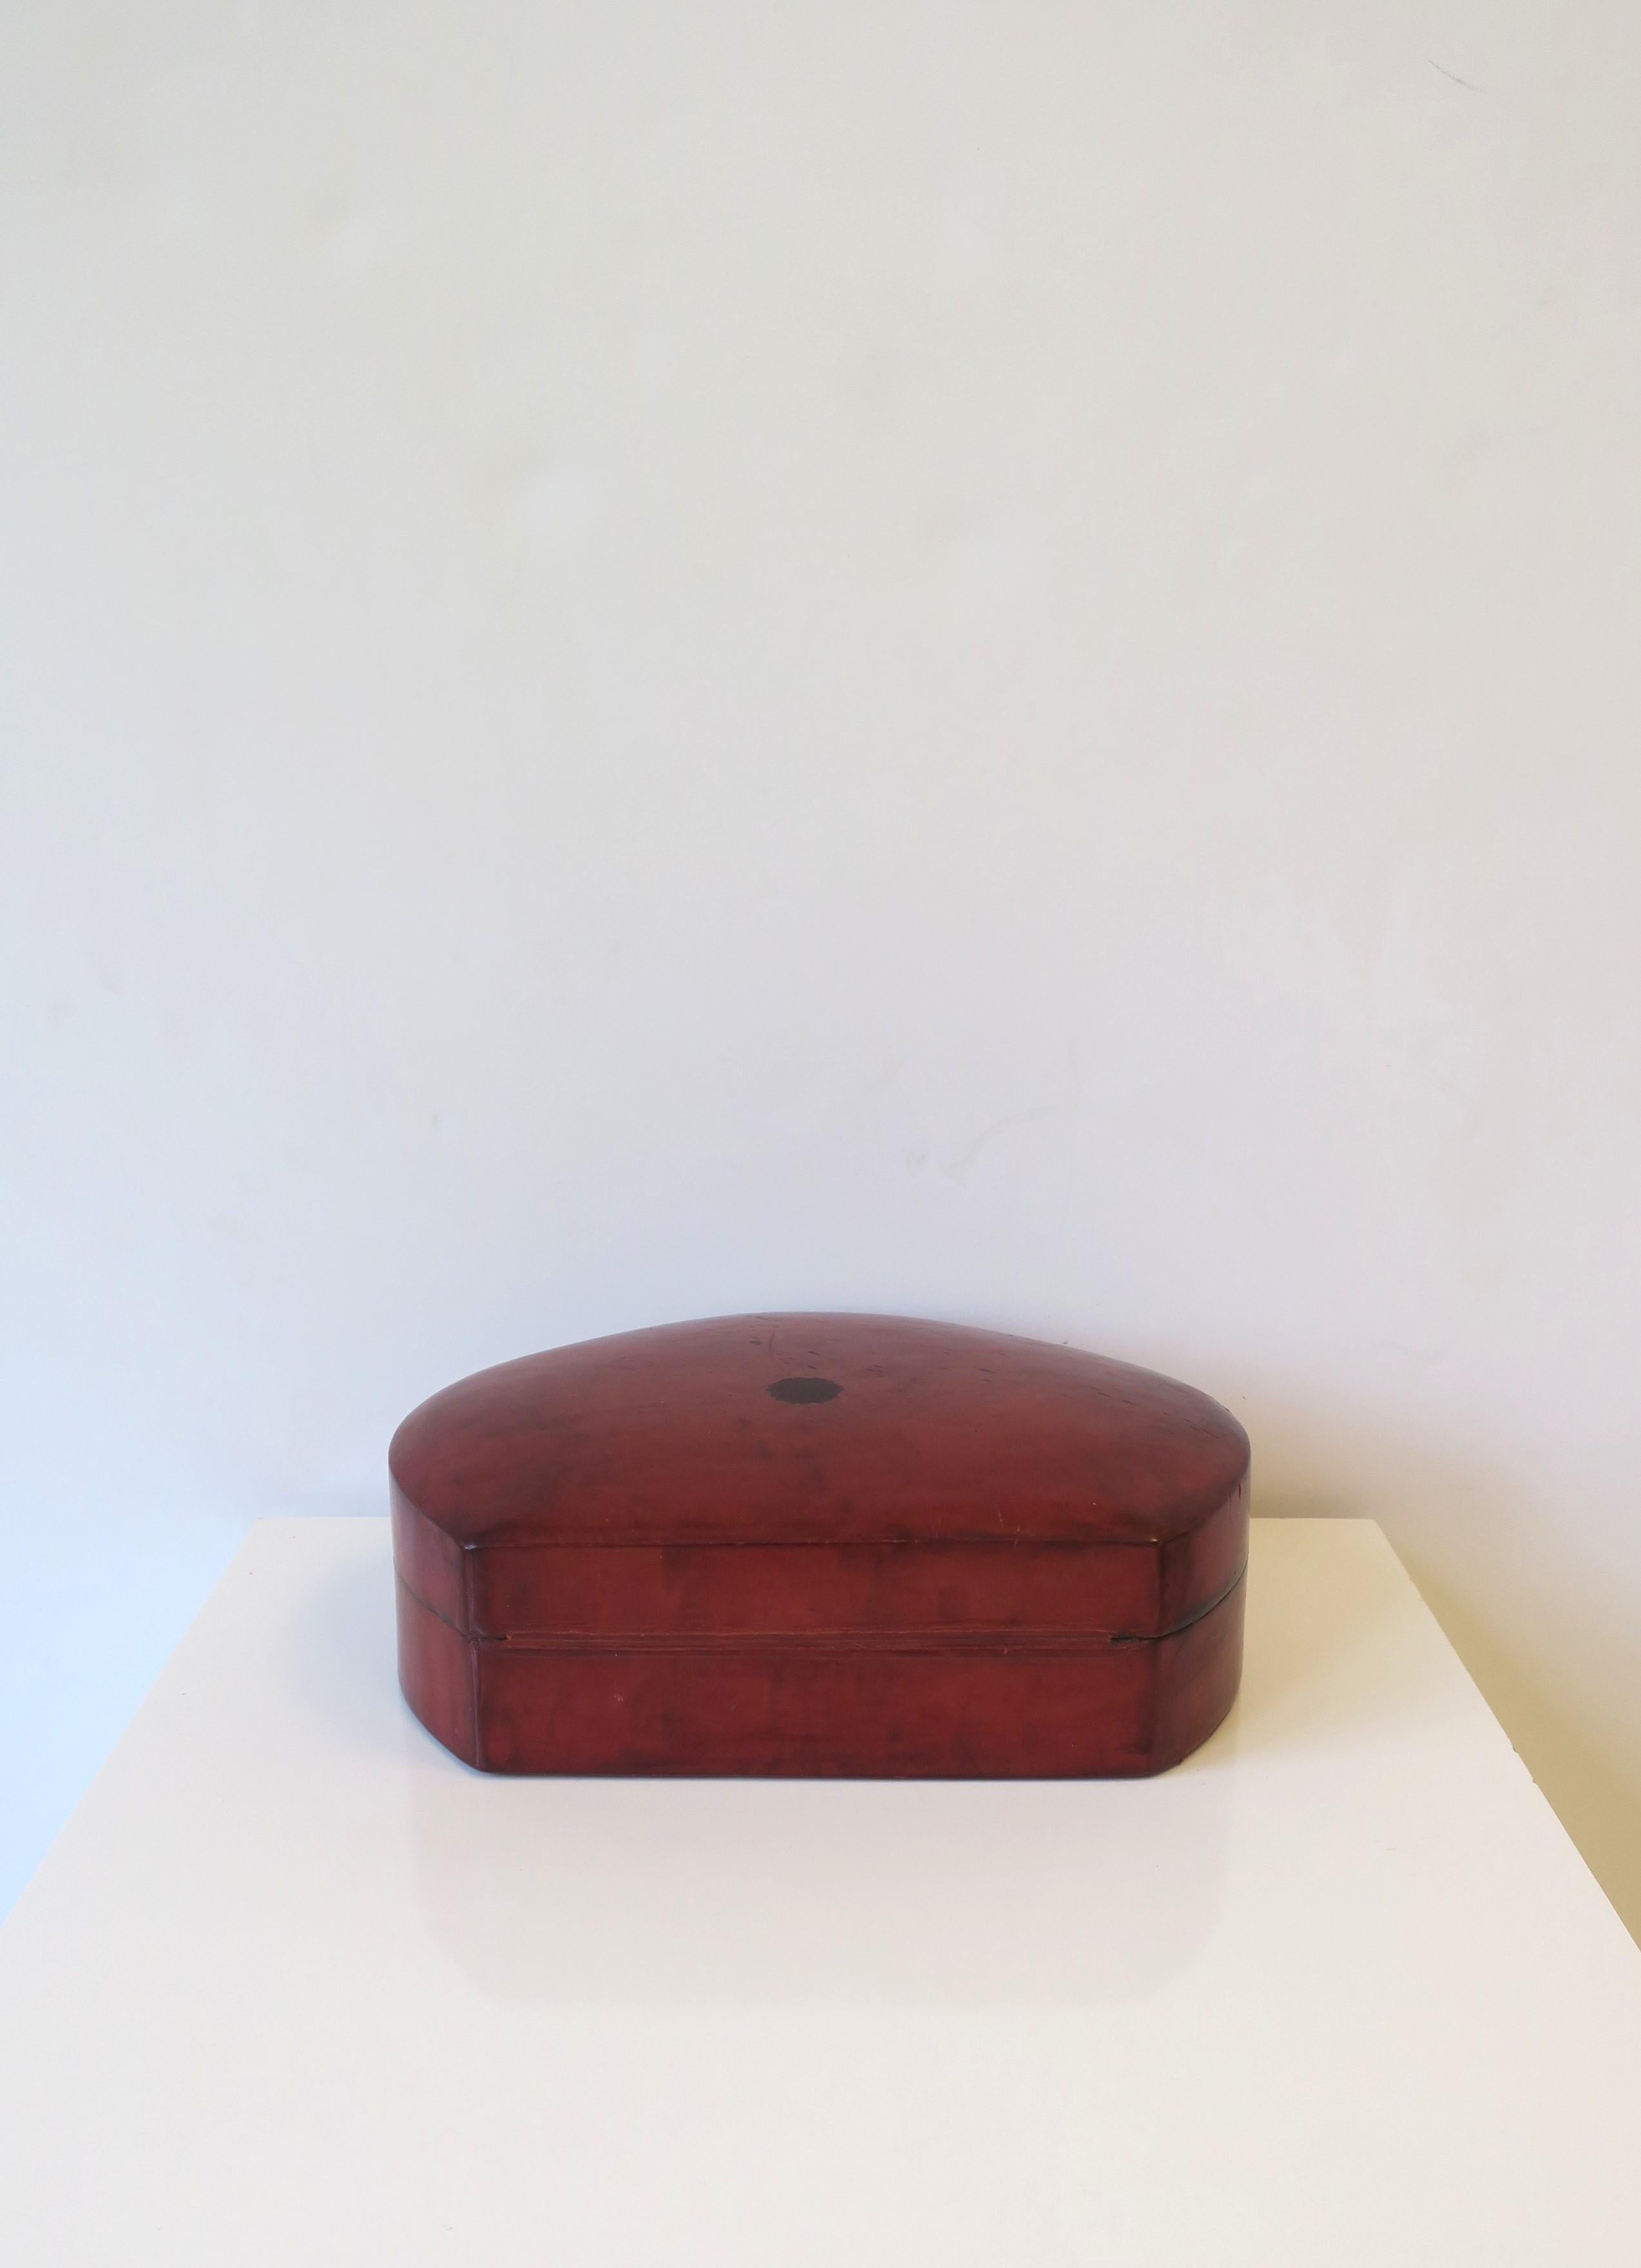 Italian Leather Jewelry Box with Scalloped Design For Sale 6